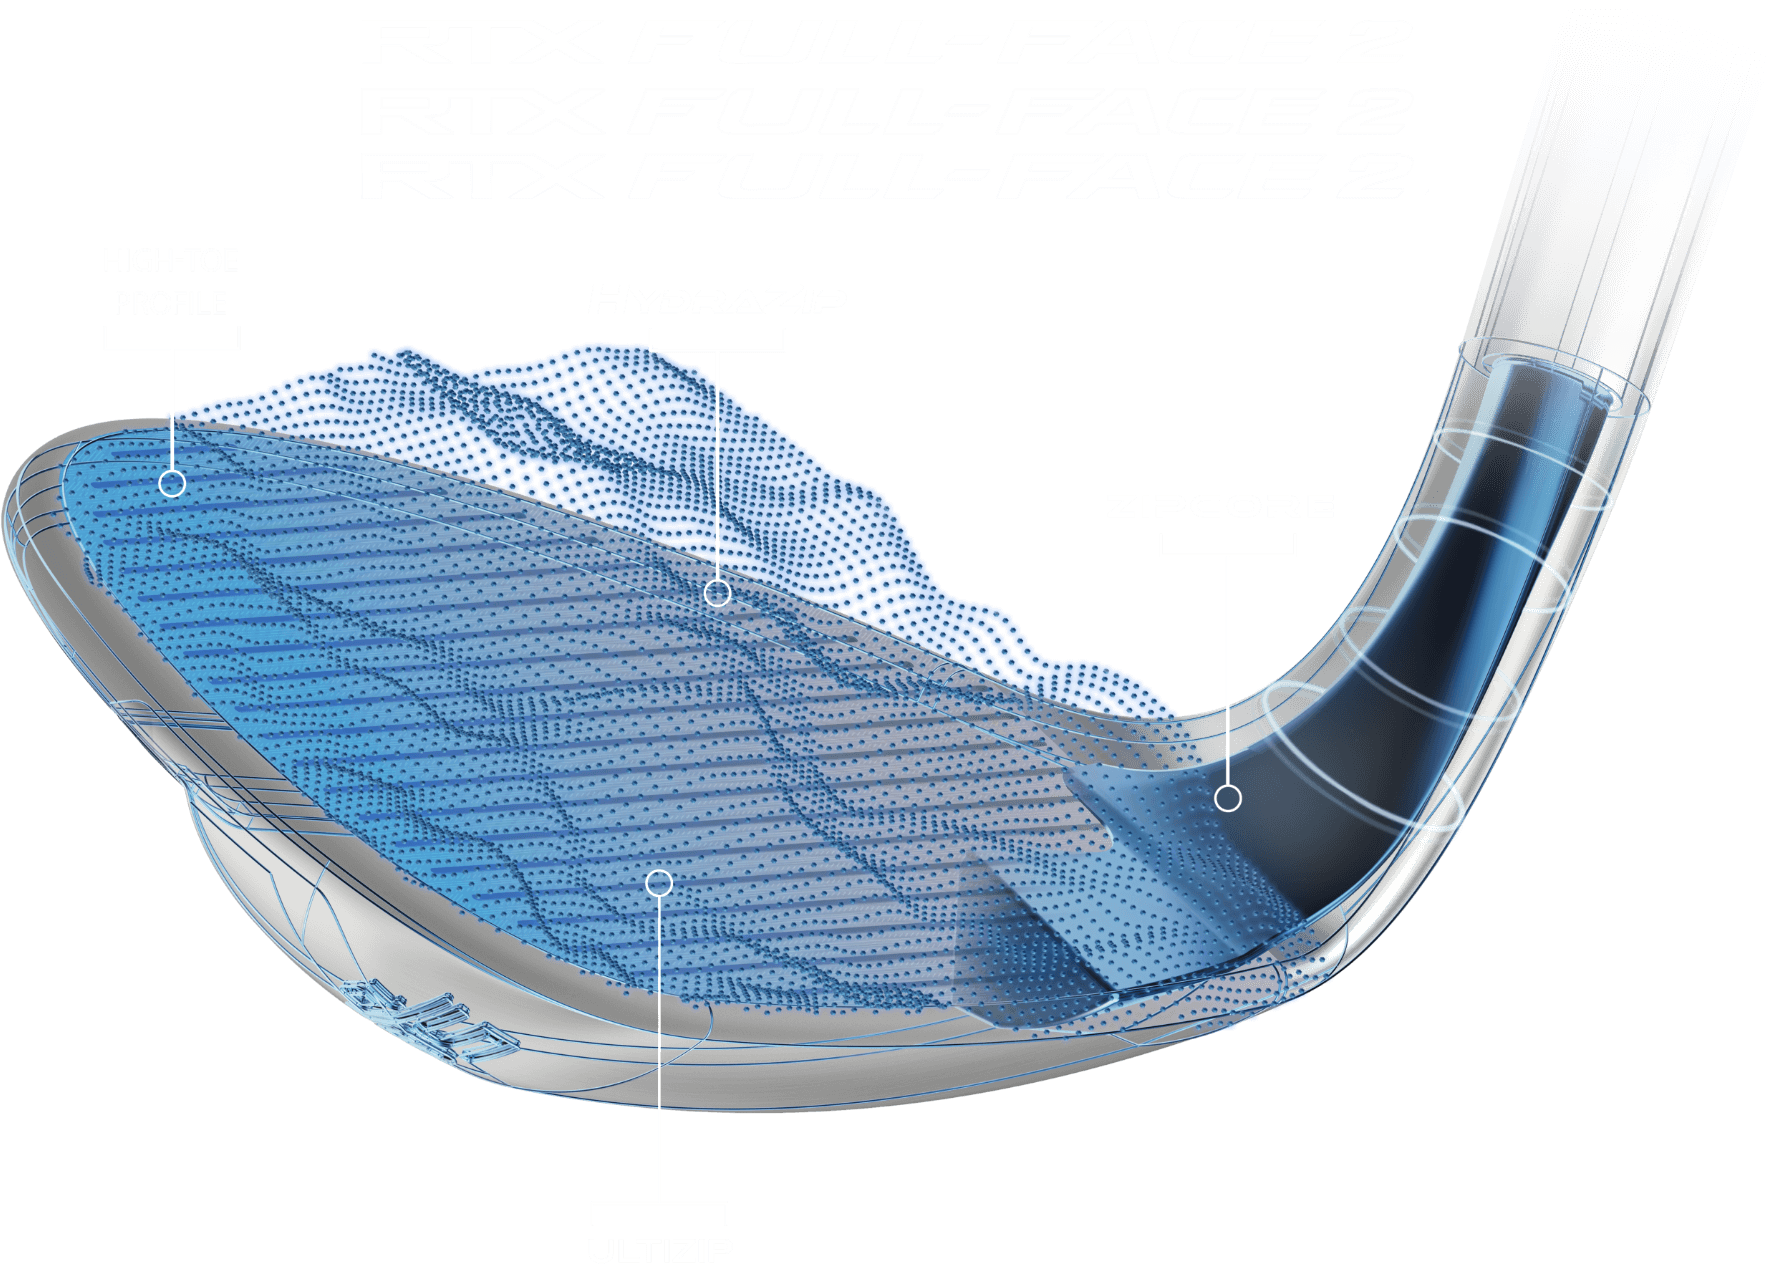 RTX Full-Face 2 Technology Overview